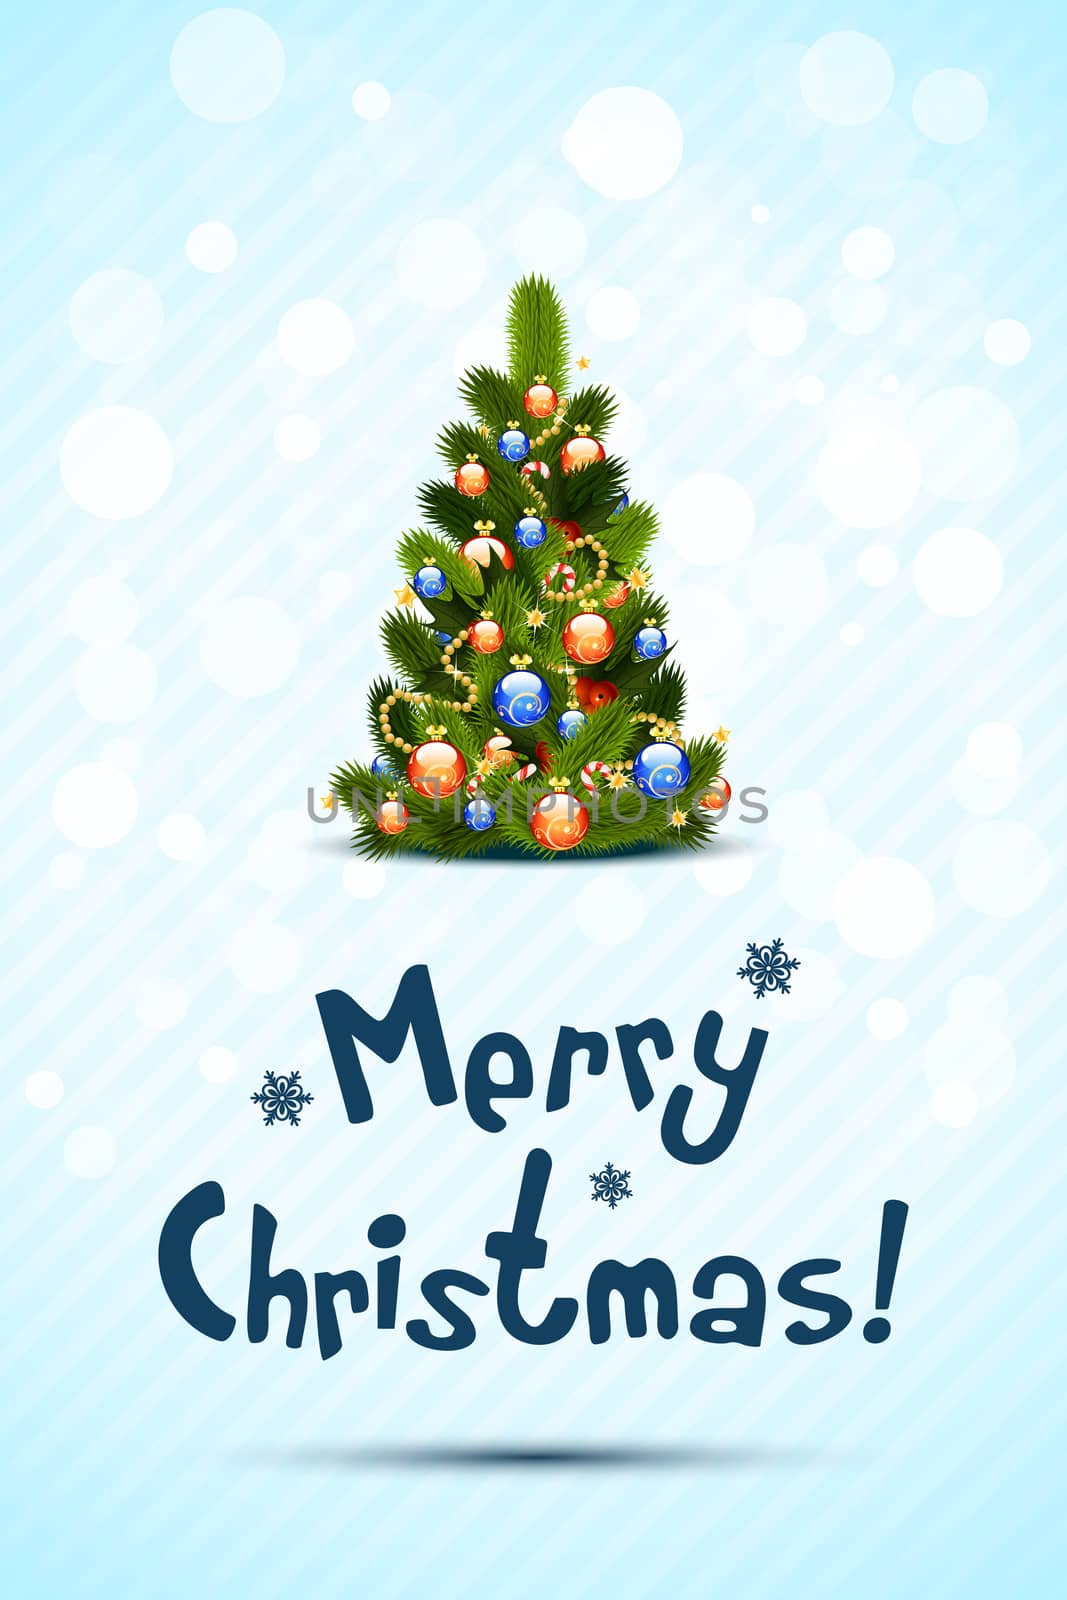 Merry Christmas Greeting Card by WaD